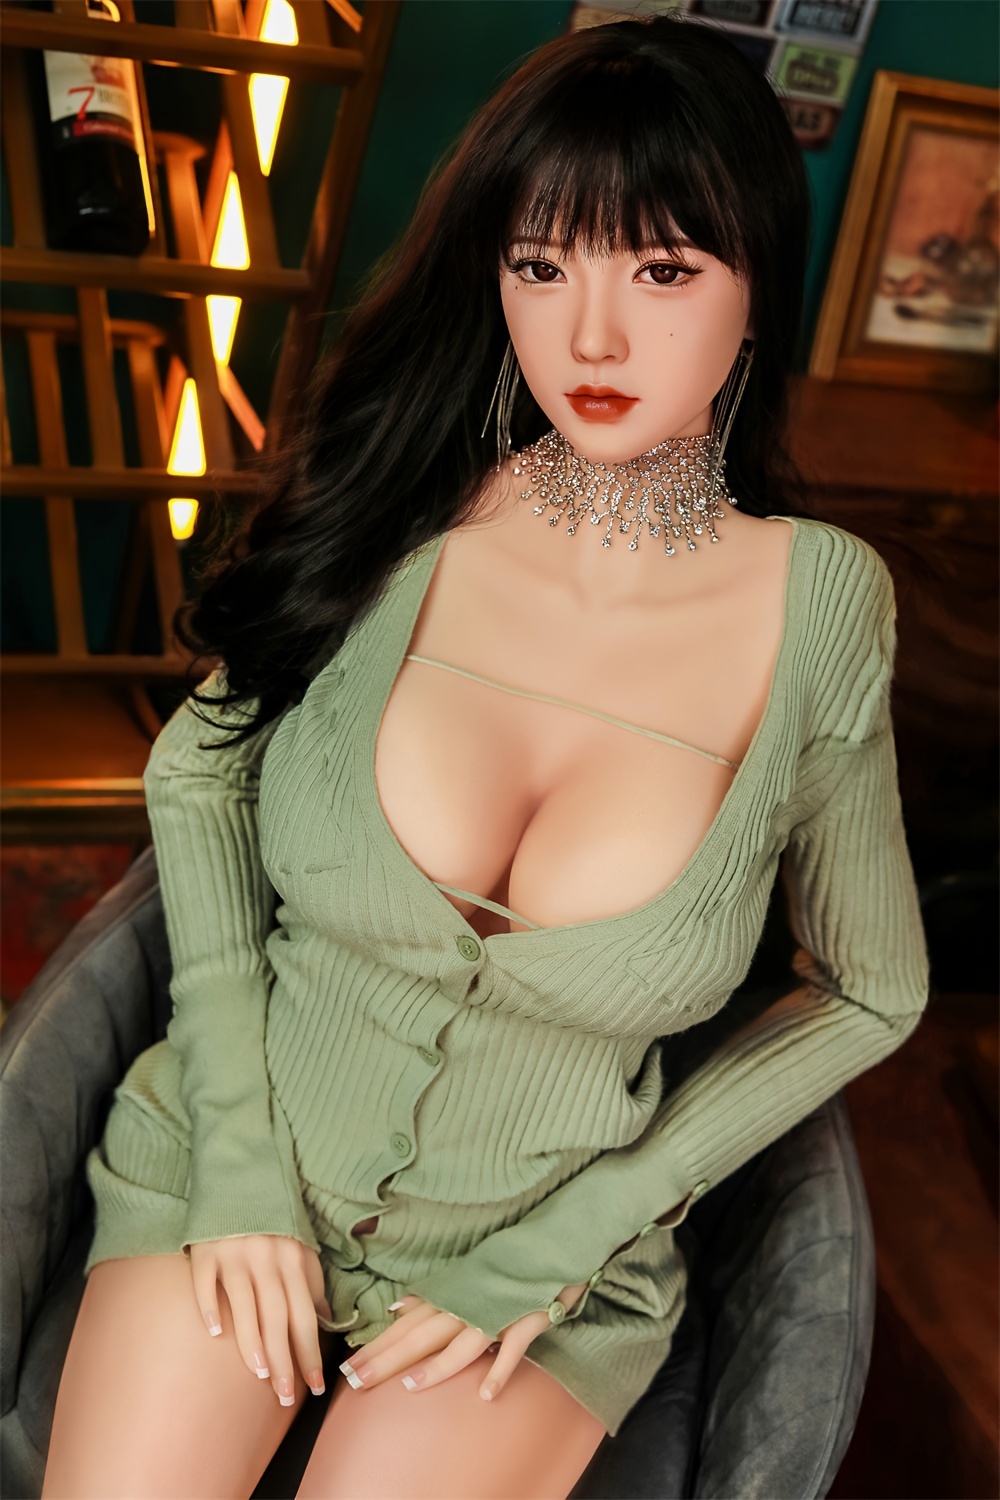 1pc 77 16lb realistic sex doll full body life size adult sex dolls tpe female torso love doll for men full size sex doll with lifelike breasts man sex toy details 3